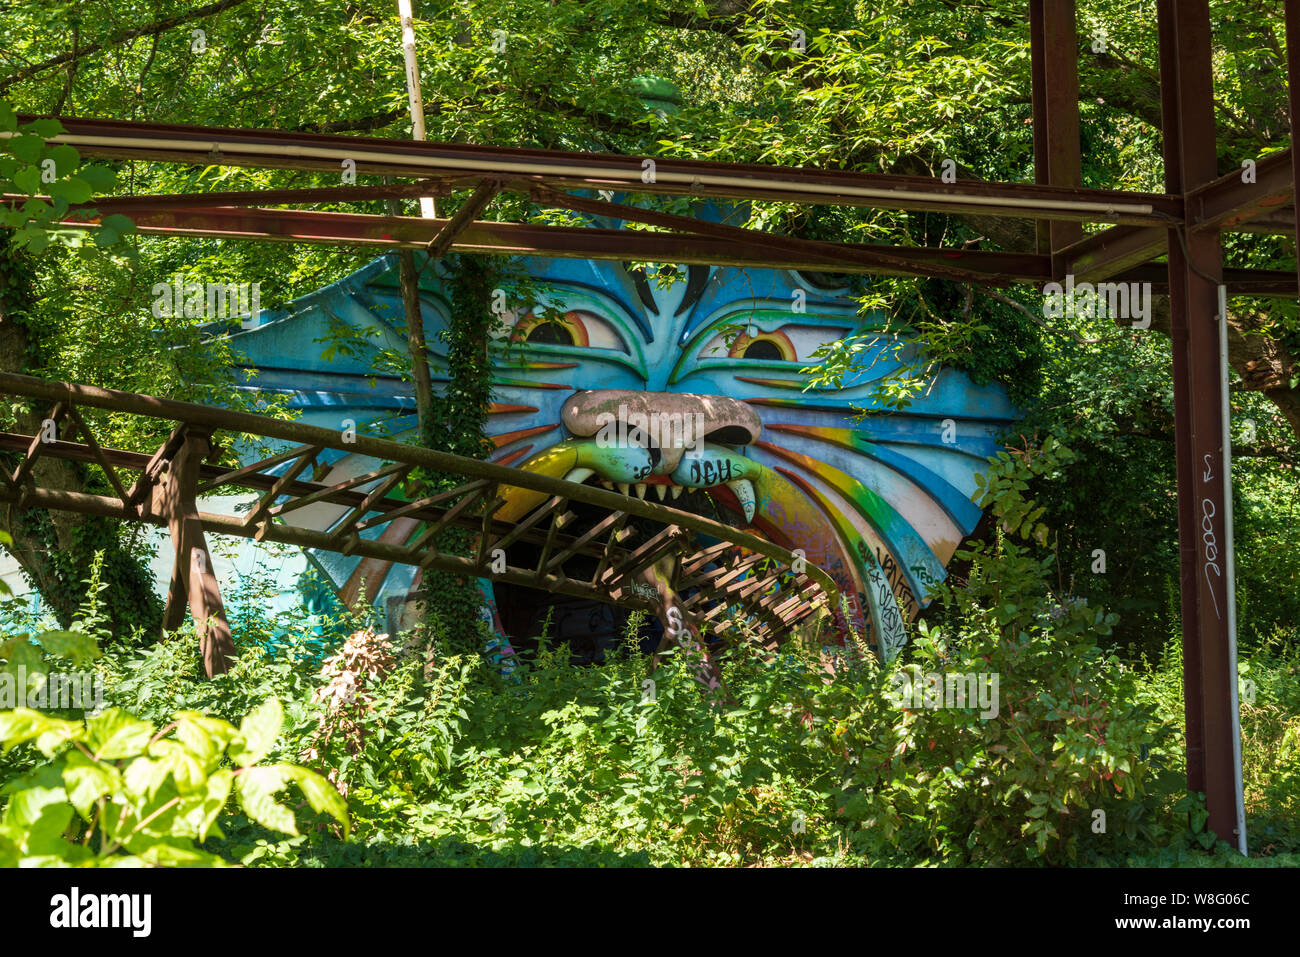 Abandoned rollercoaster in Spreepark, disused Berlin theme park from the GDR era Stock Photo